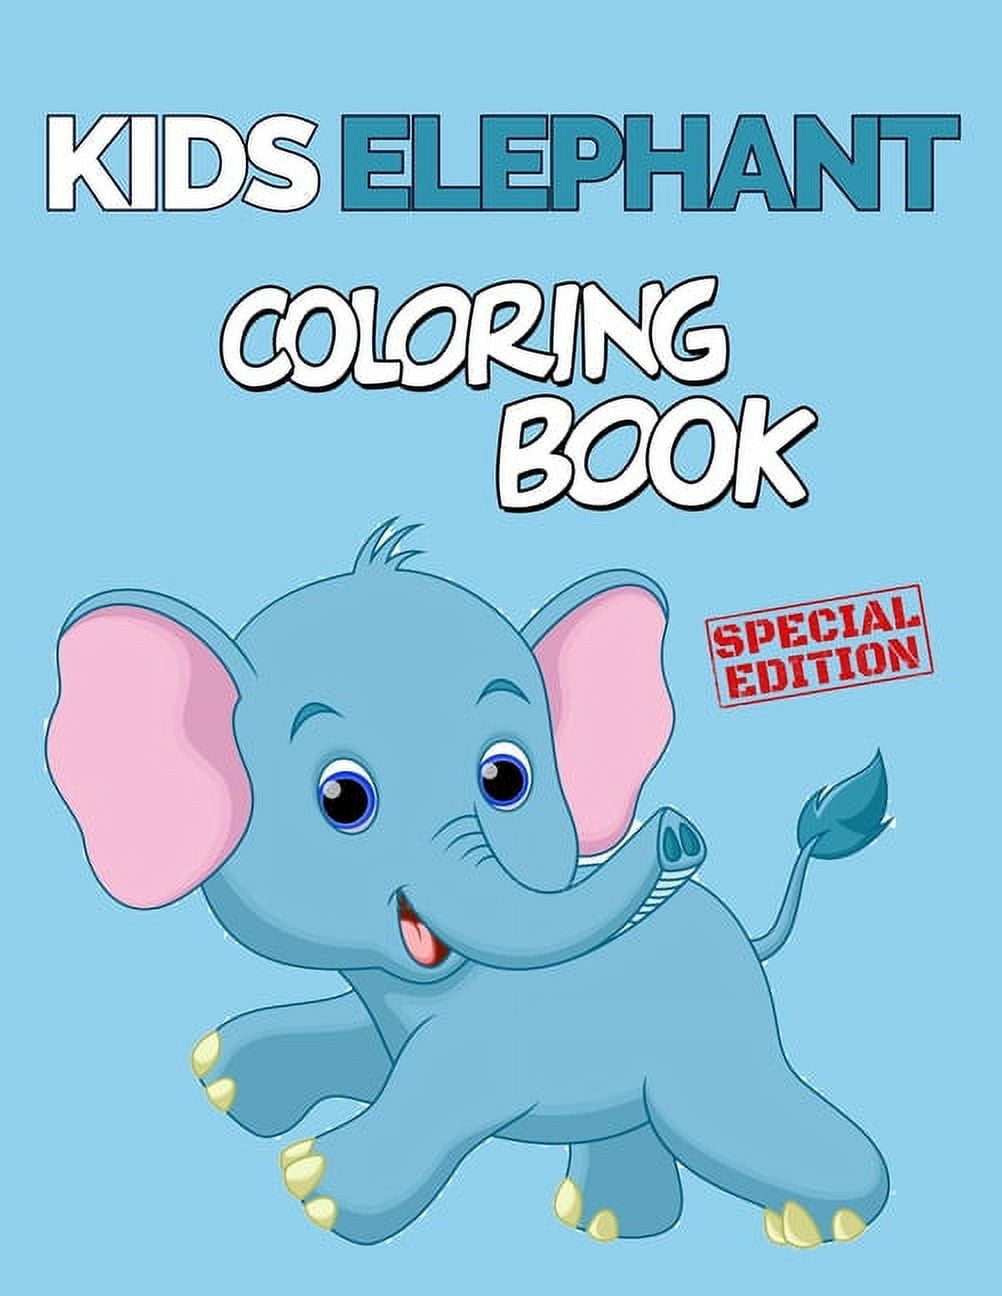 Coloring Book Stress: Children Coloring and Activity Books for Kids Ages 3-5,  6-8, Boys, Girls, Early Learning (Safari Animals #5) (Paperback)